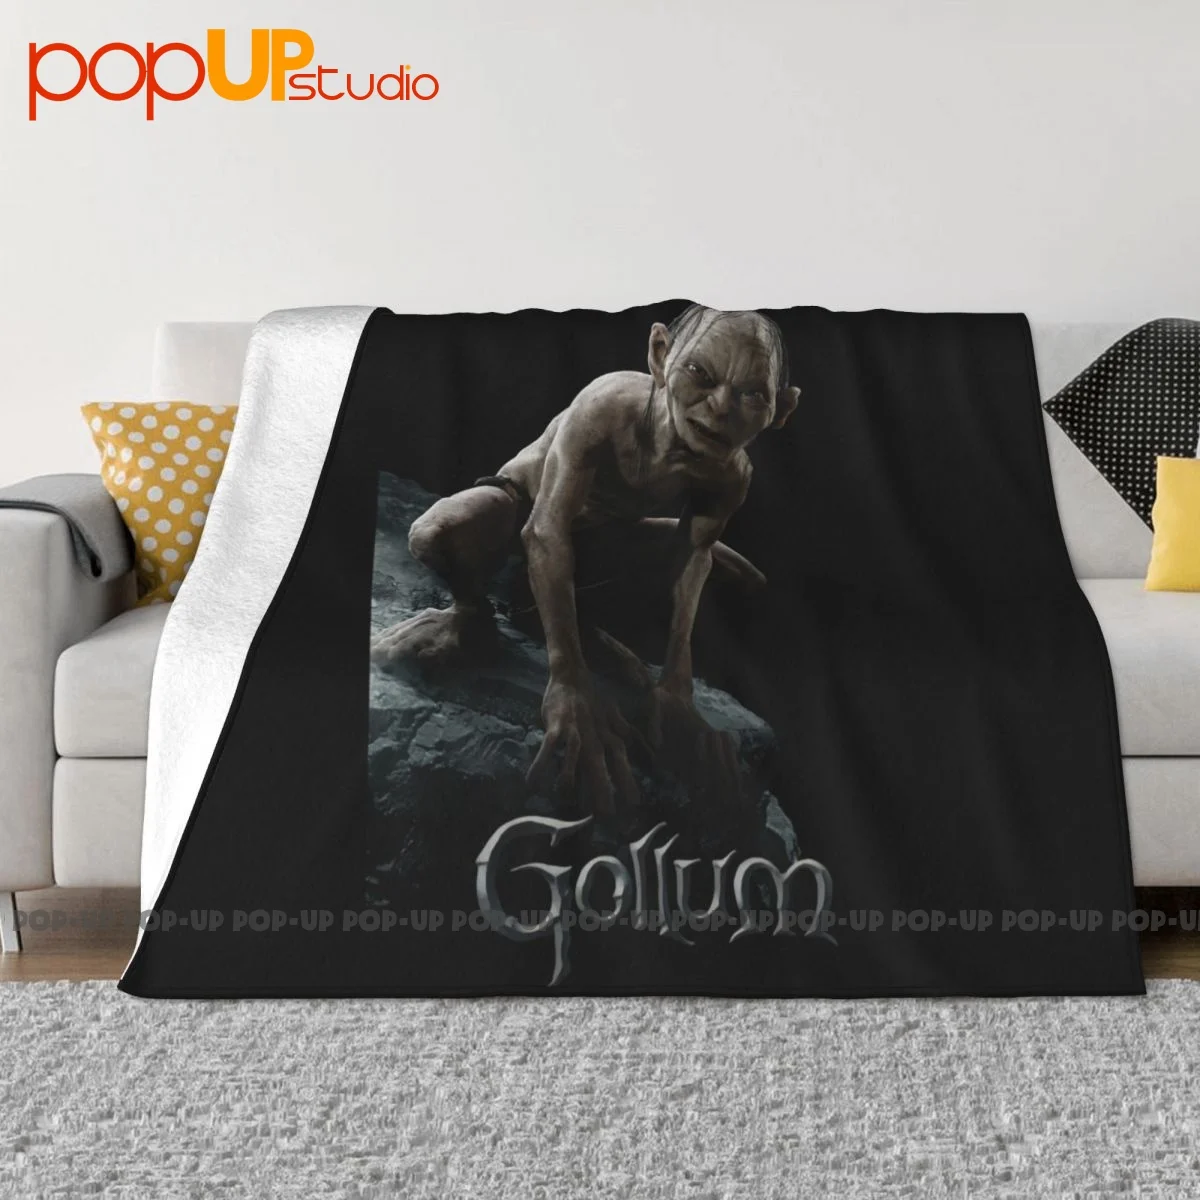 L-Lord of the Rings blanket fashion blanket Warm Blanket Flannel Soft  Comfortable Blanket Home Travel Blanket Birthday Gift - AliExpress